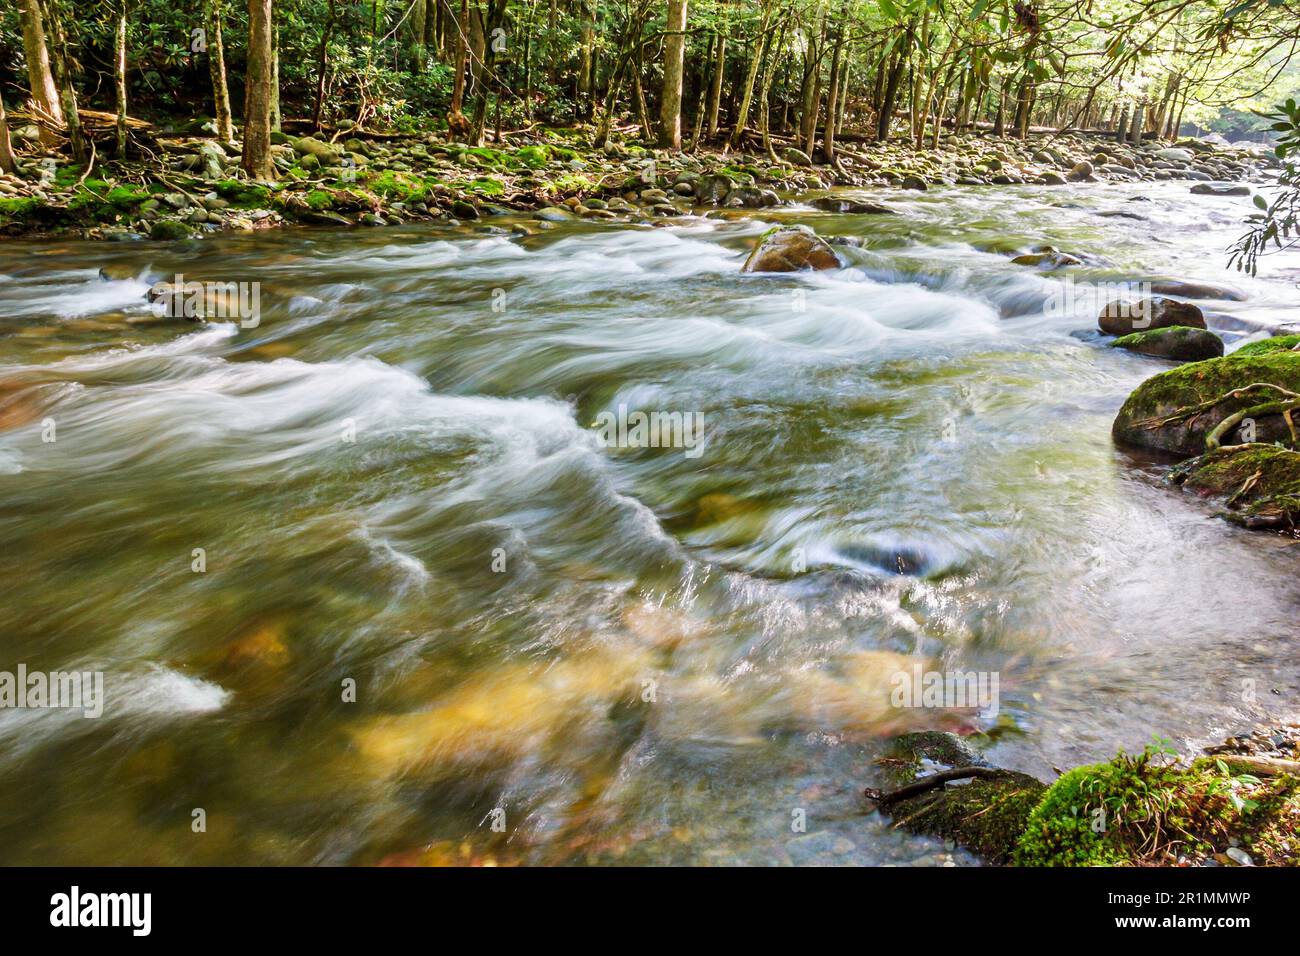 Tennessee Great Smoky Mountains National Park, paesaggio naturale torrente fiume scorre, 080403 W0035 Foto Stock